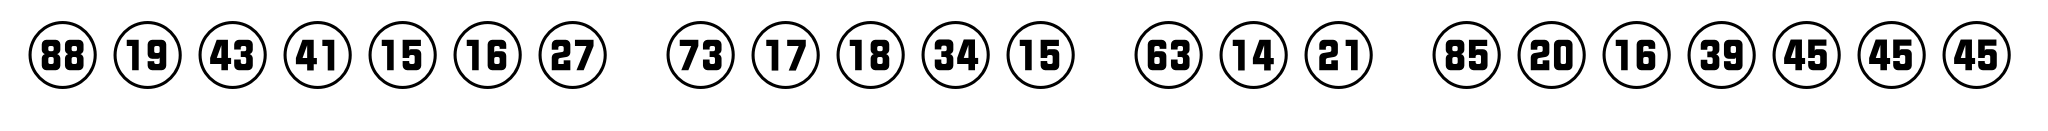 Numbers Style Two Circle Positive image